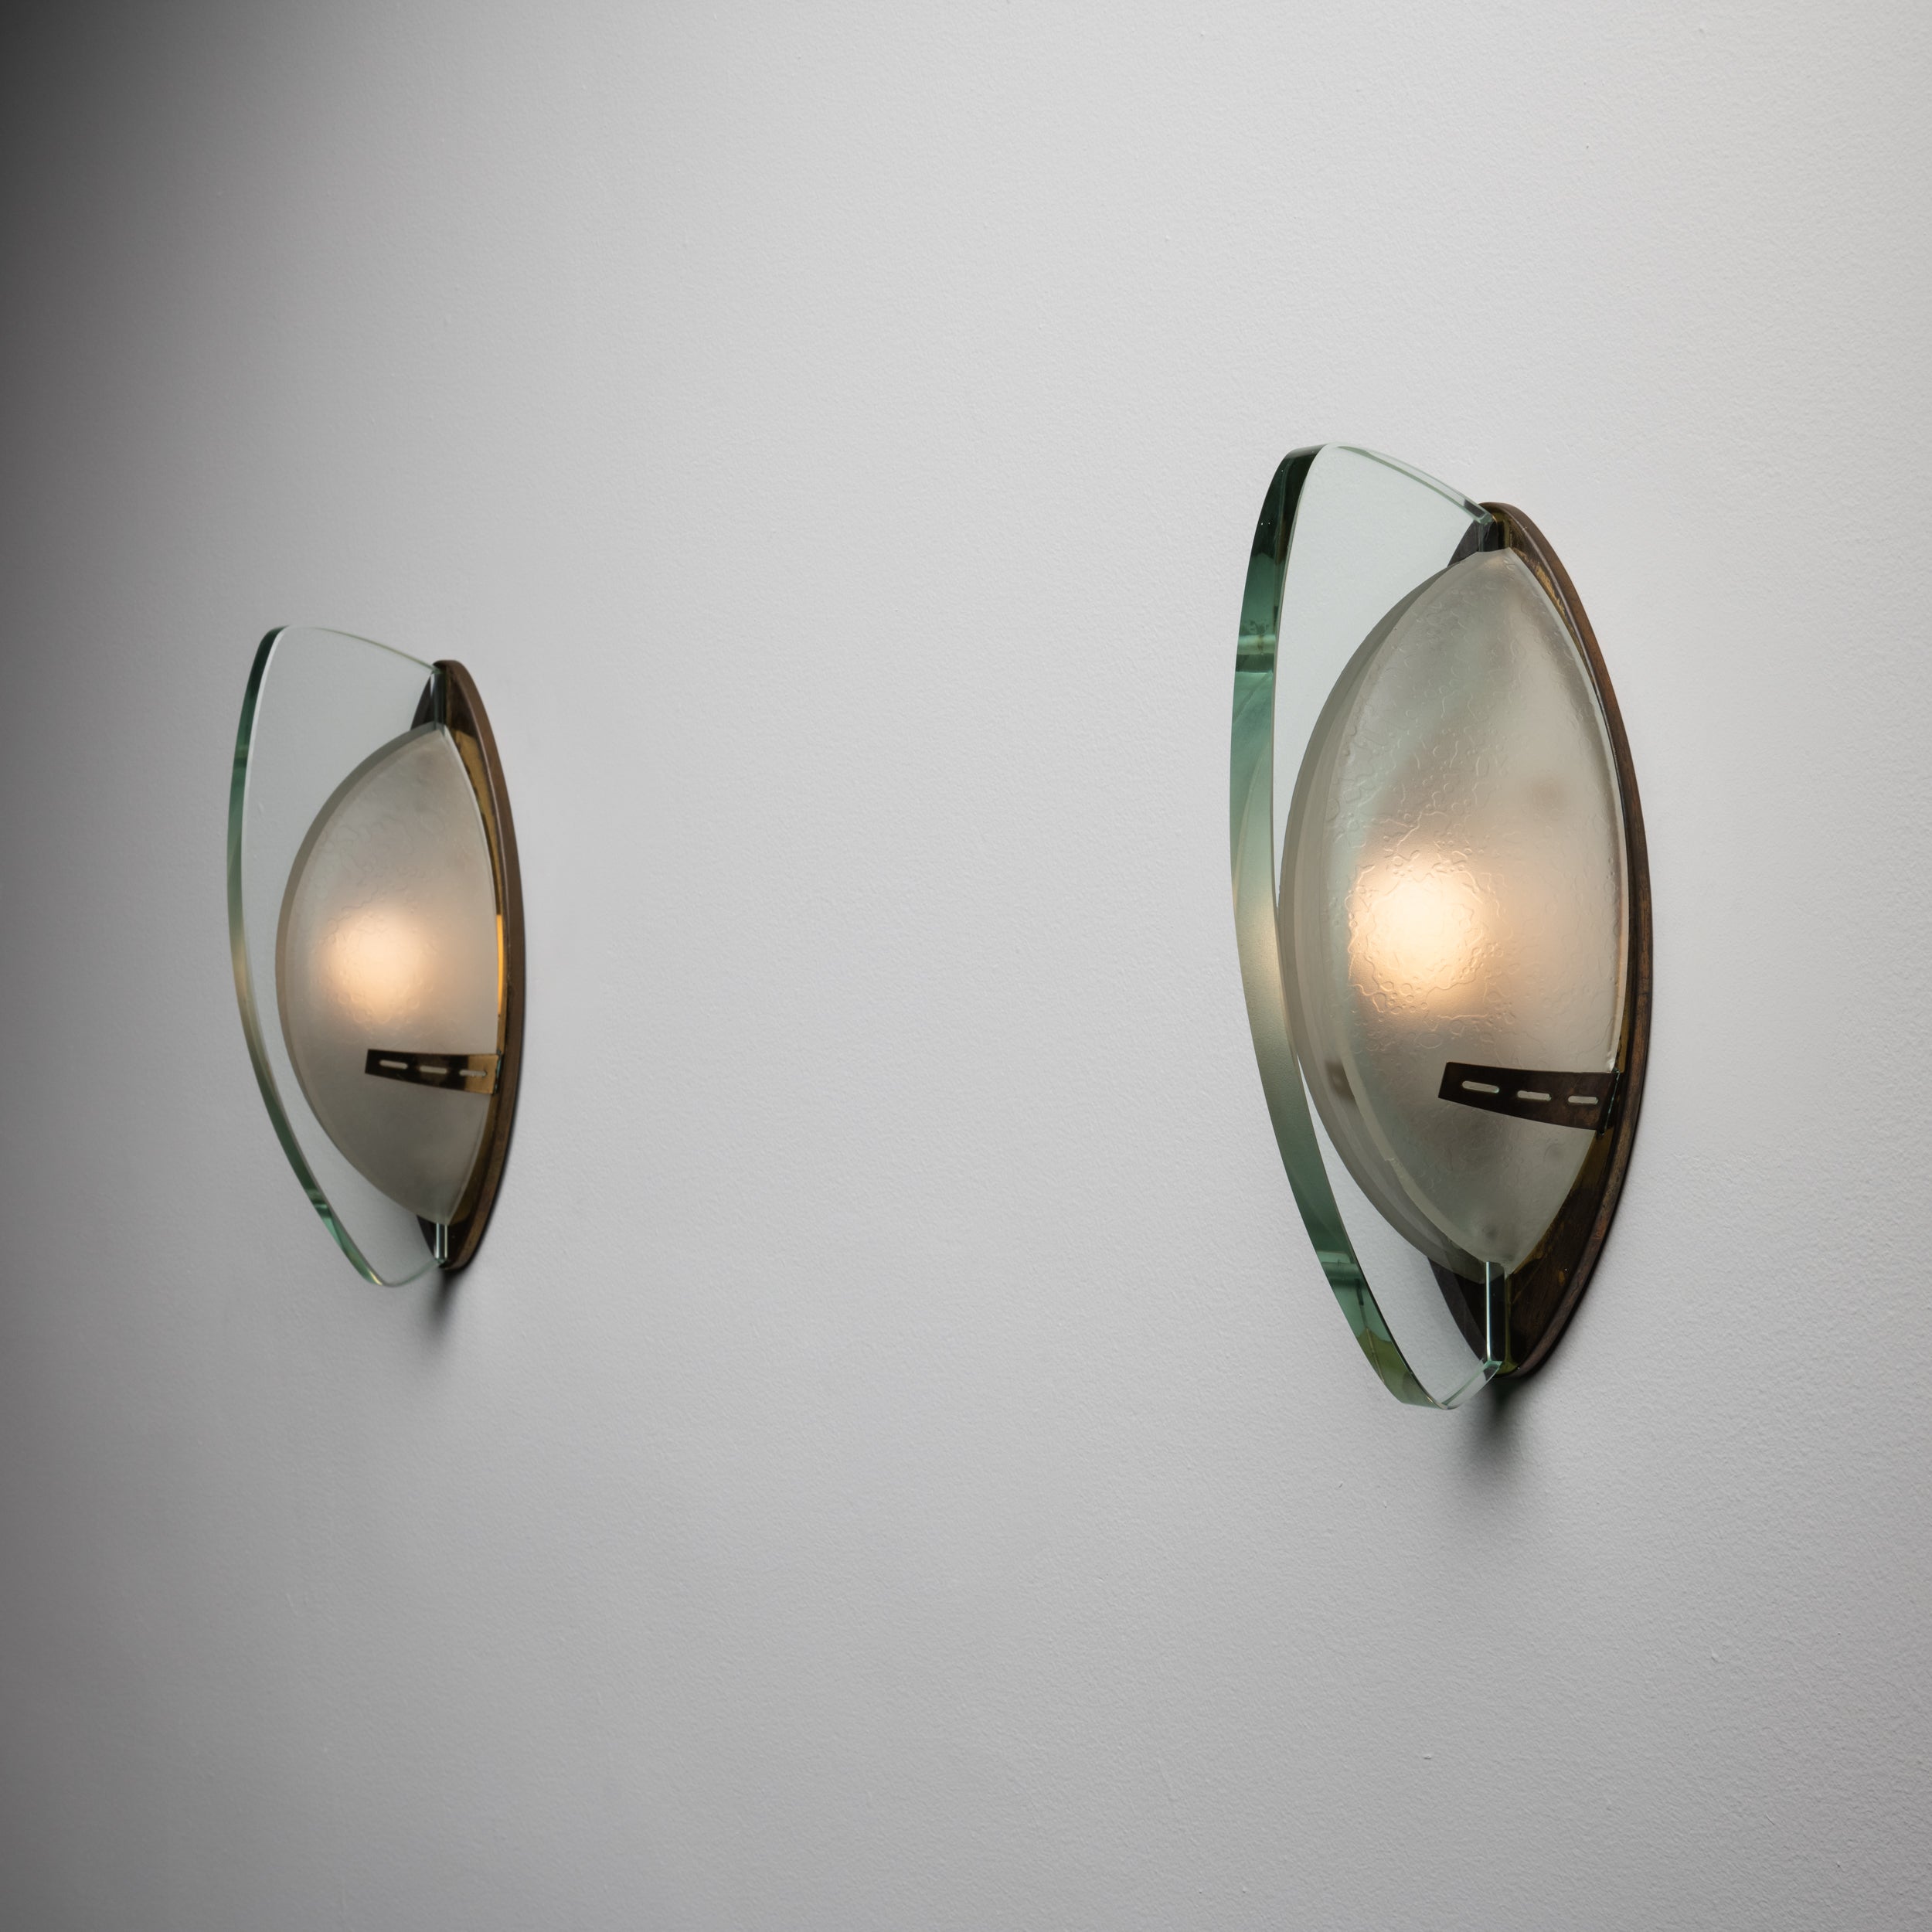 A rare pair of sconces by Stilnovo. Designed and manufactured in Italy, circa 1950's. These sconces feature a brass structure and diffusers in thick ground crystal and satin glass. Rewired for U.S. standards. We recommend two E14 25 w maximum bulbs.